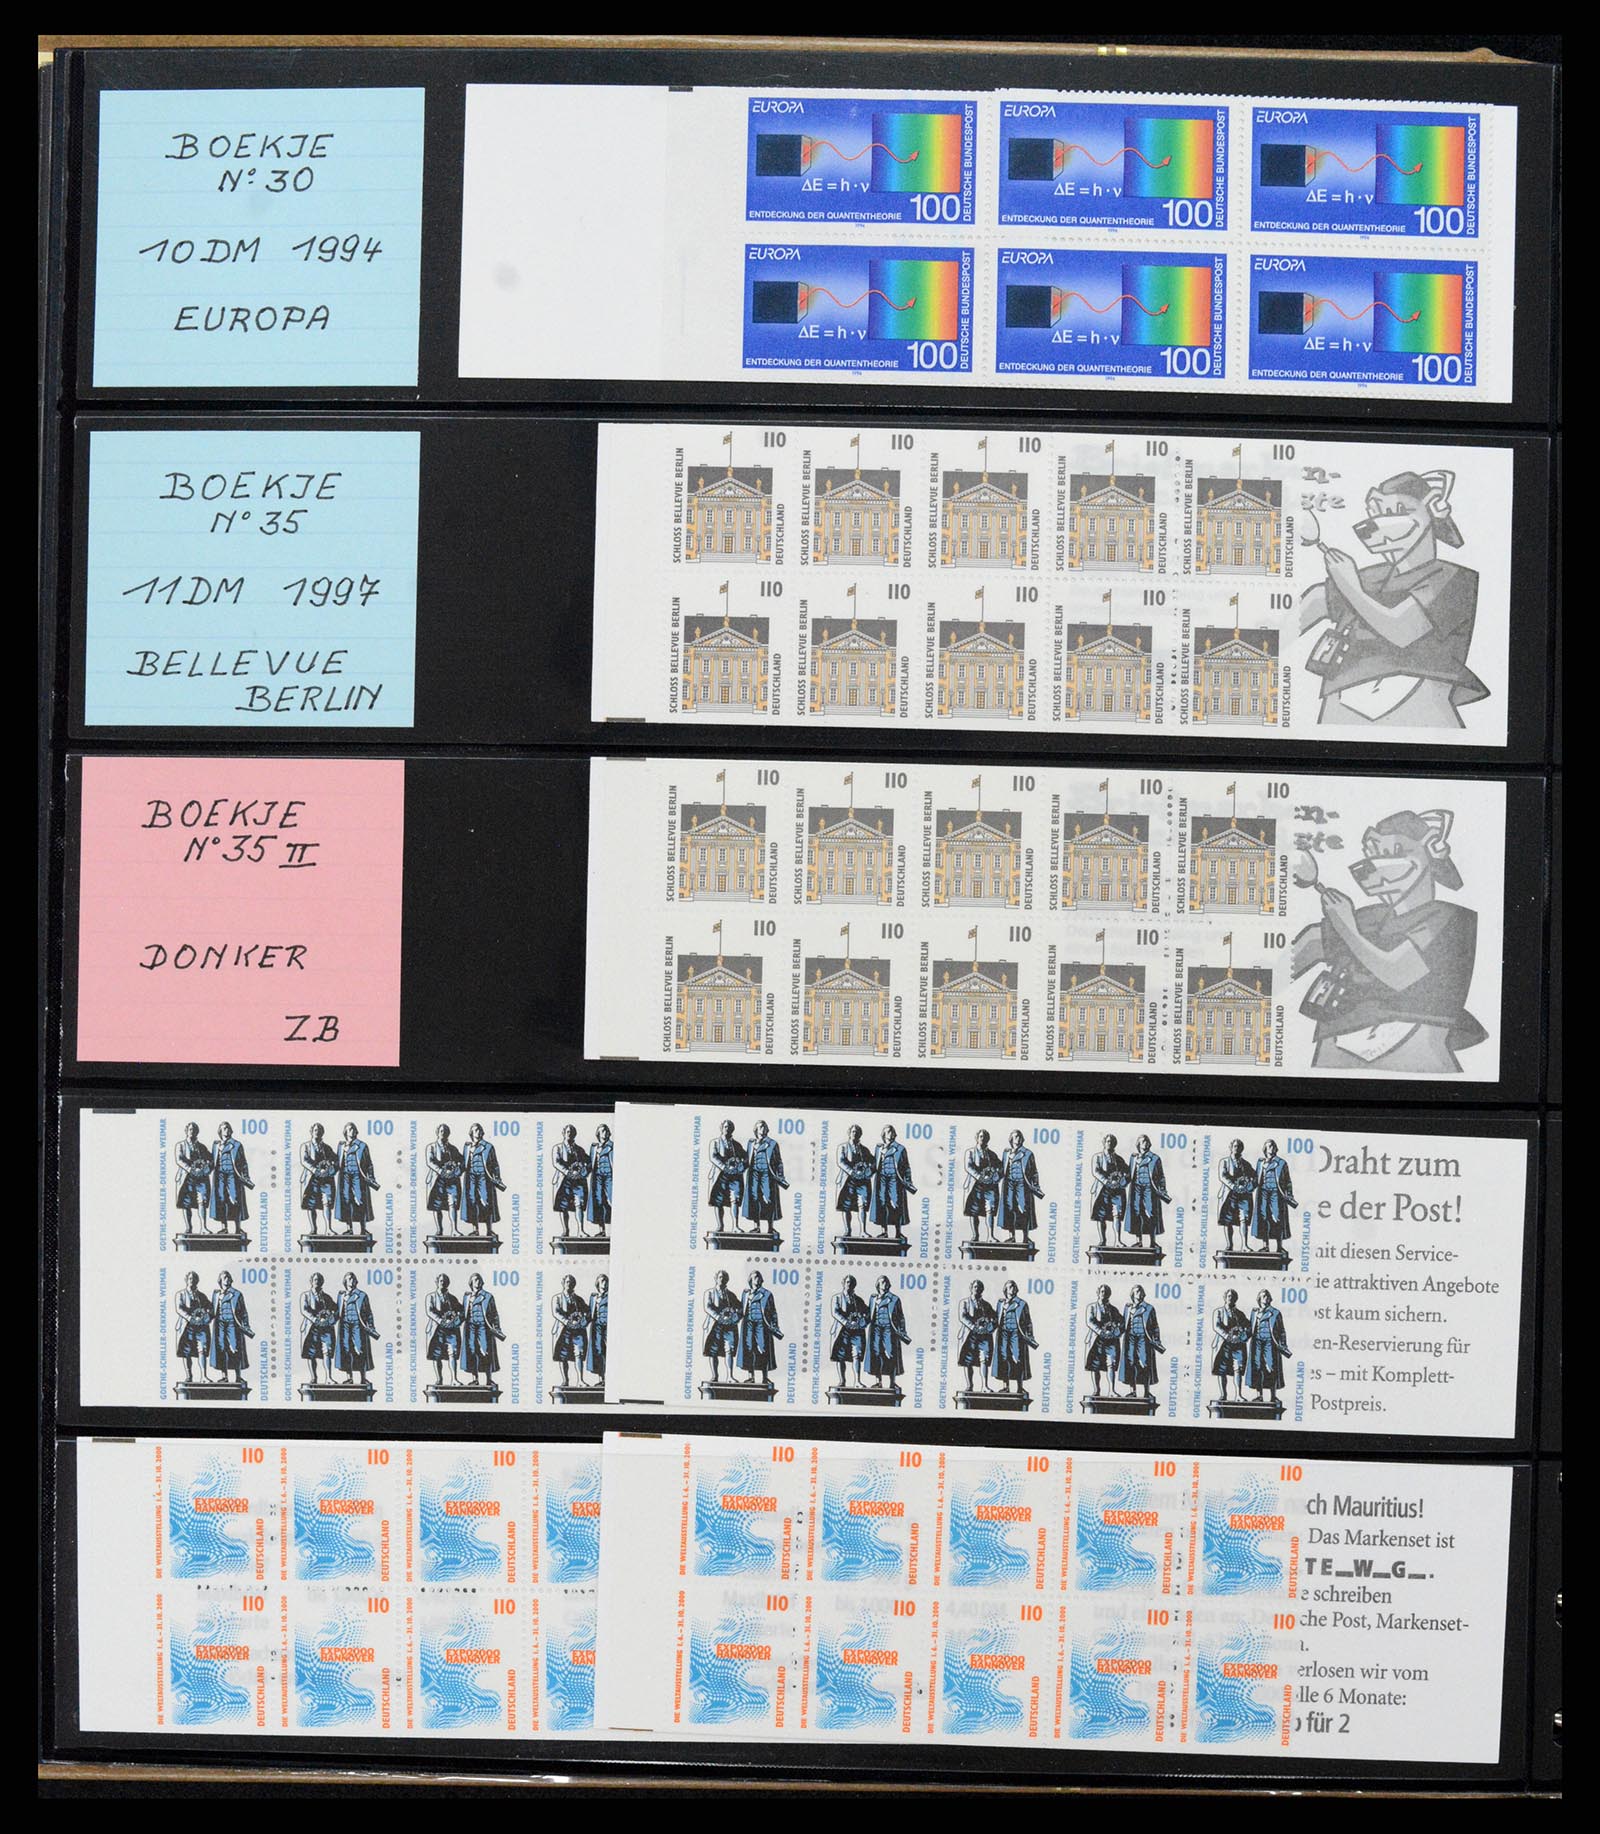 37365 069 - Stamp collection 37365 Bundespost stamp booklets 1951-2001.